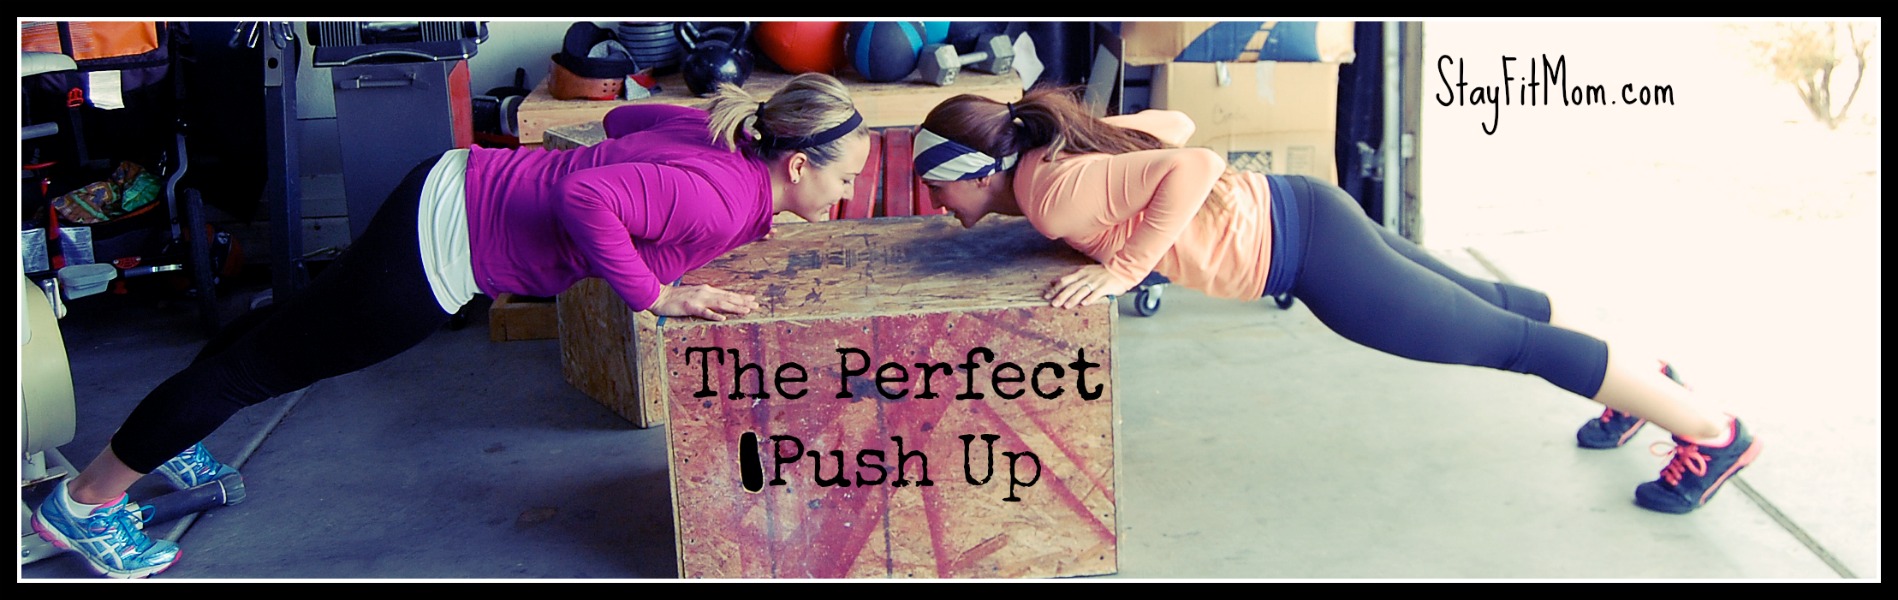 I've been doing push ups on my knees forever! I'm going to try this!